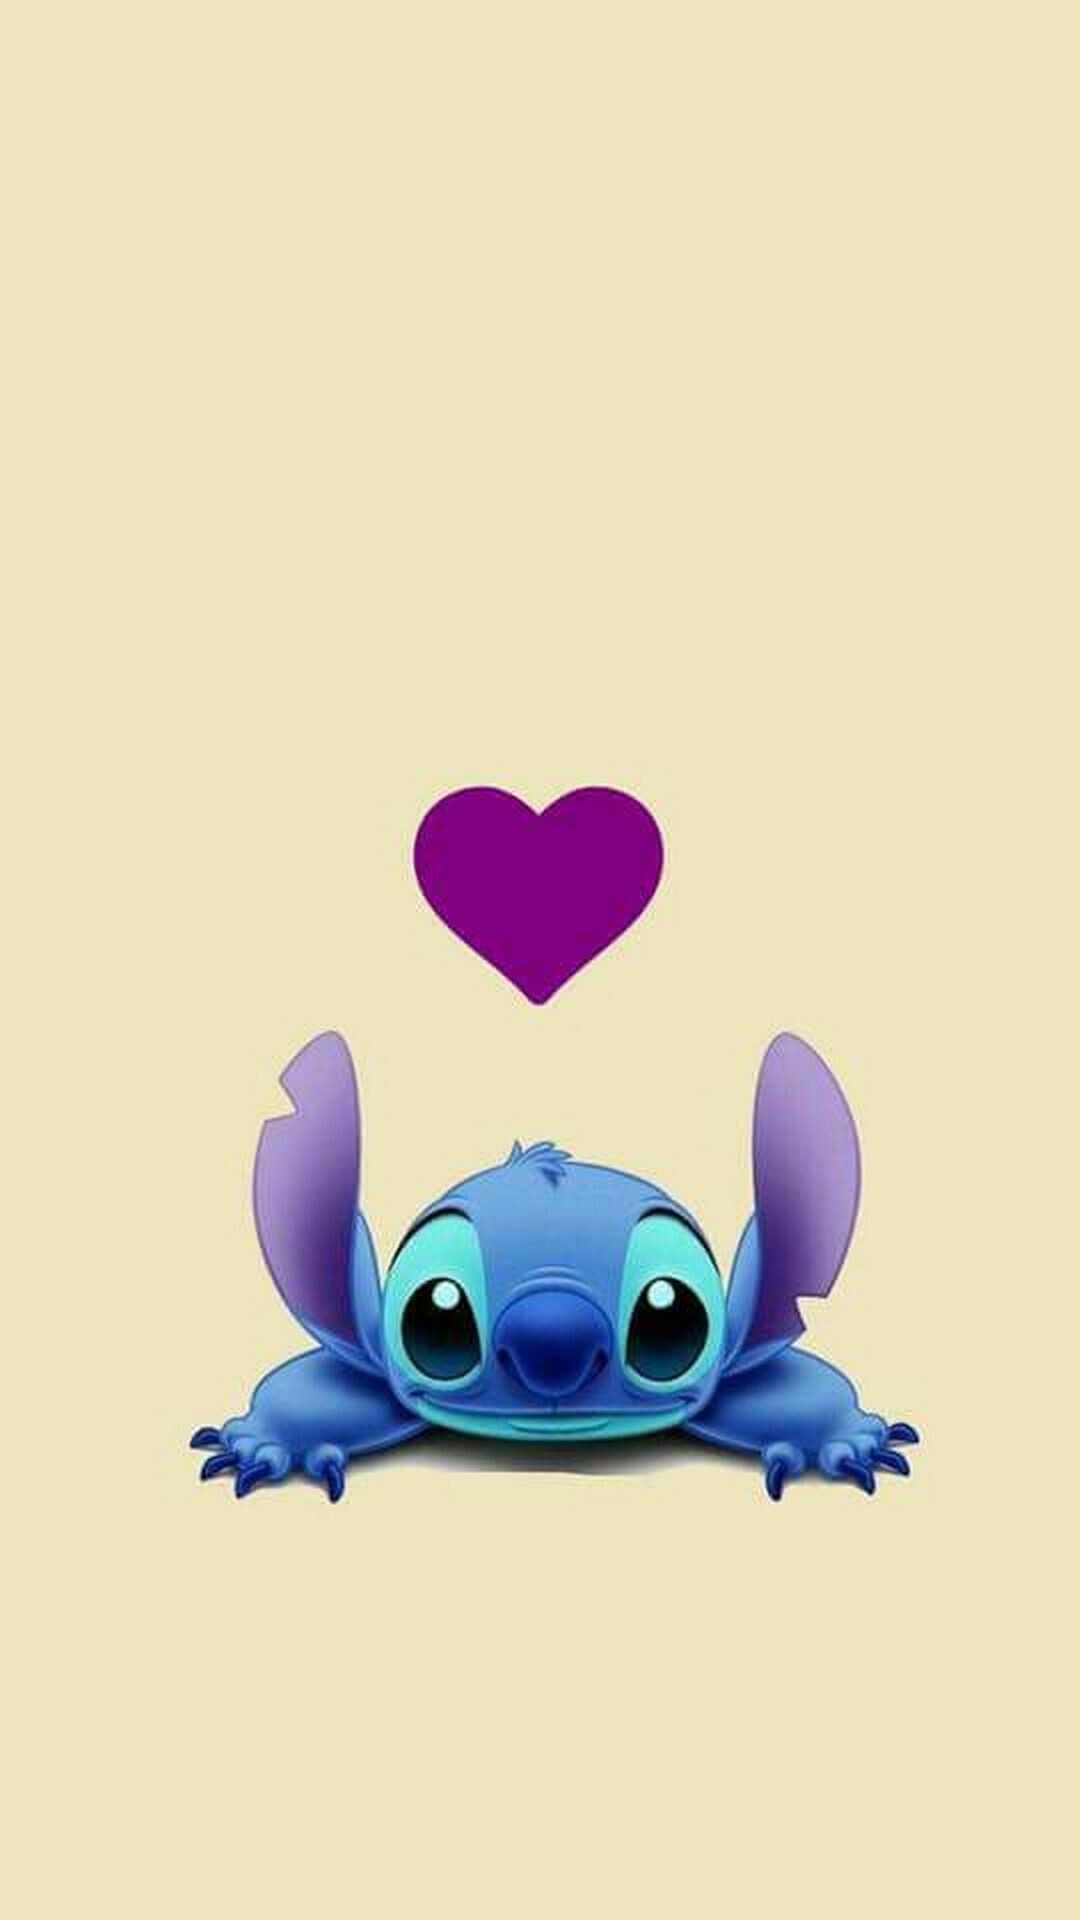 Lilo and Stitch: An artificial extraterrestrial creature originally named Experiment 626. 1080x1920 Full HD Background.